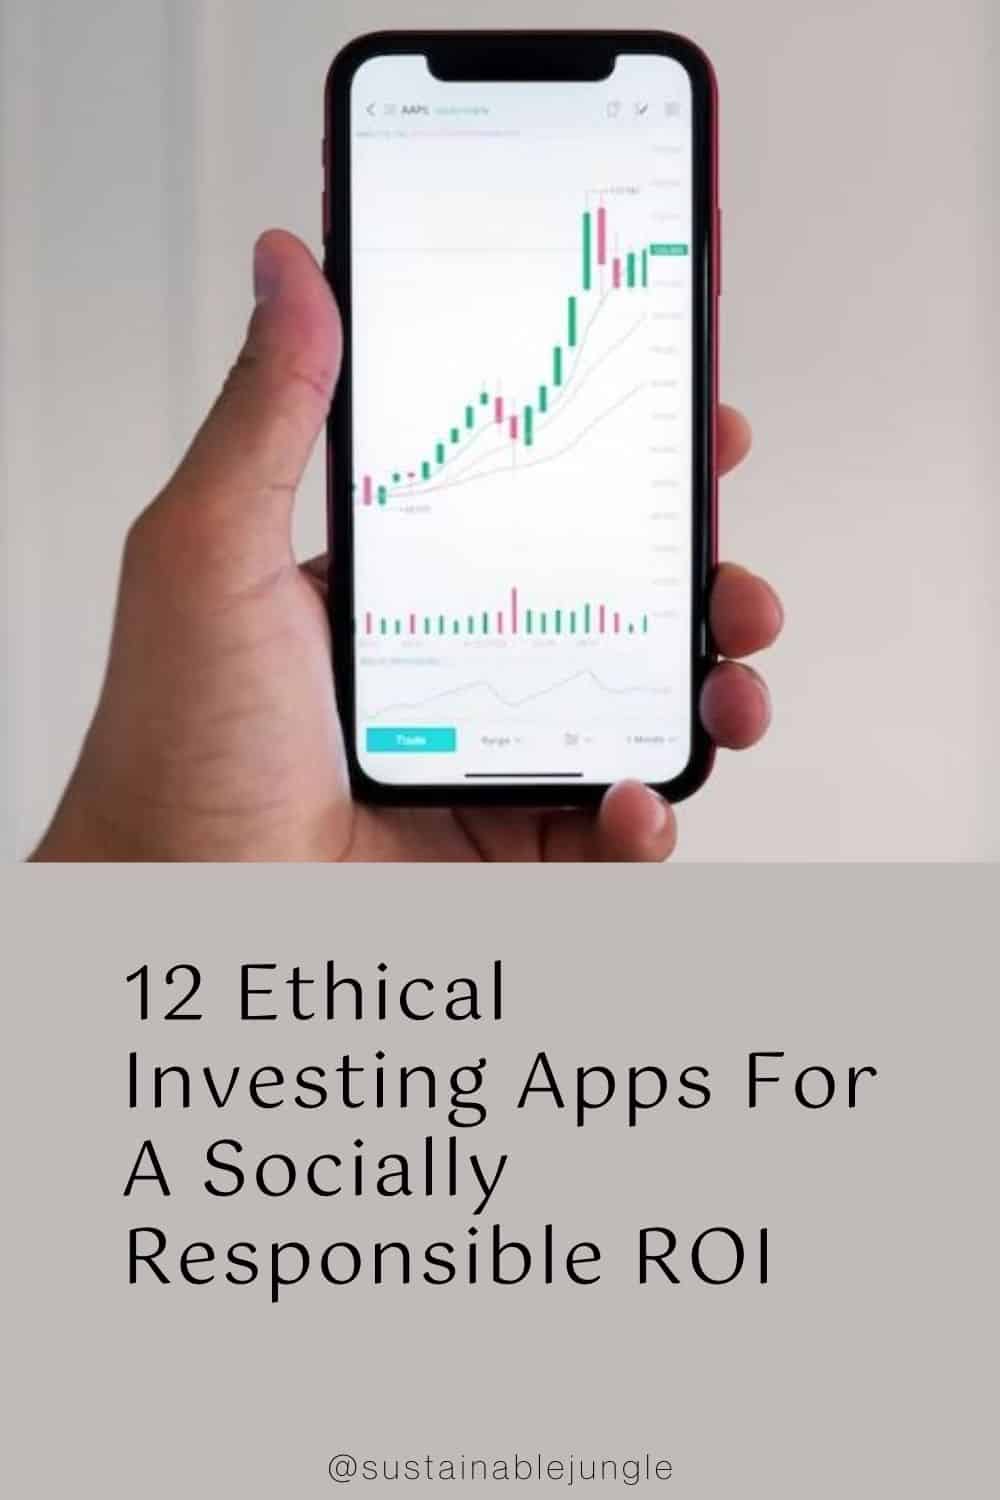 12 Ethical Investing Apps For A Socially Responsible ROI Image by Joshua May via Unsplash #ethicalinvestingapps #ethicalinvestingplatforms #socialinvestingapps #sociallyresponsibleinvestingapps #ethicalinvestmentapp #sustainablejungle